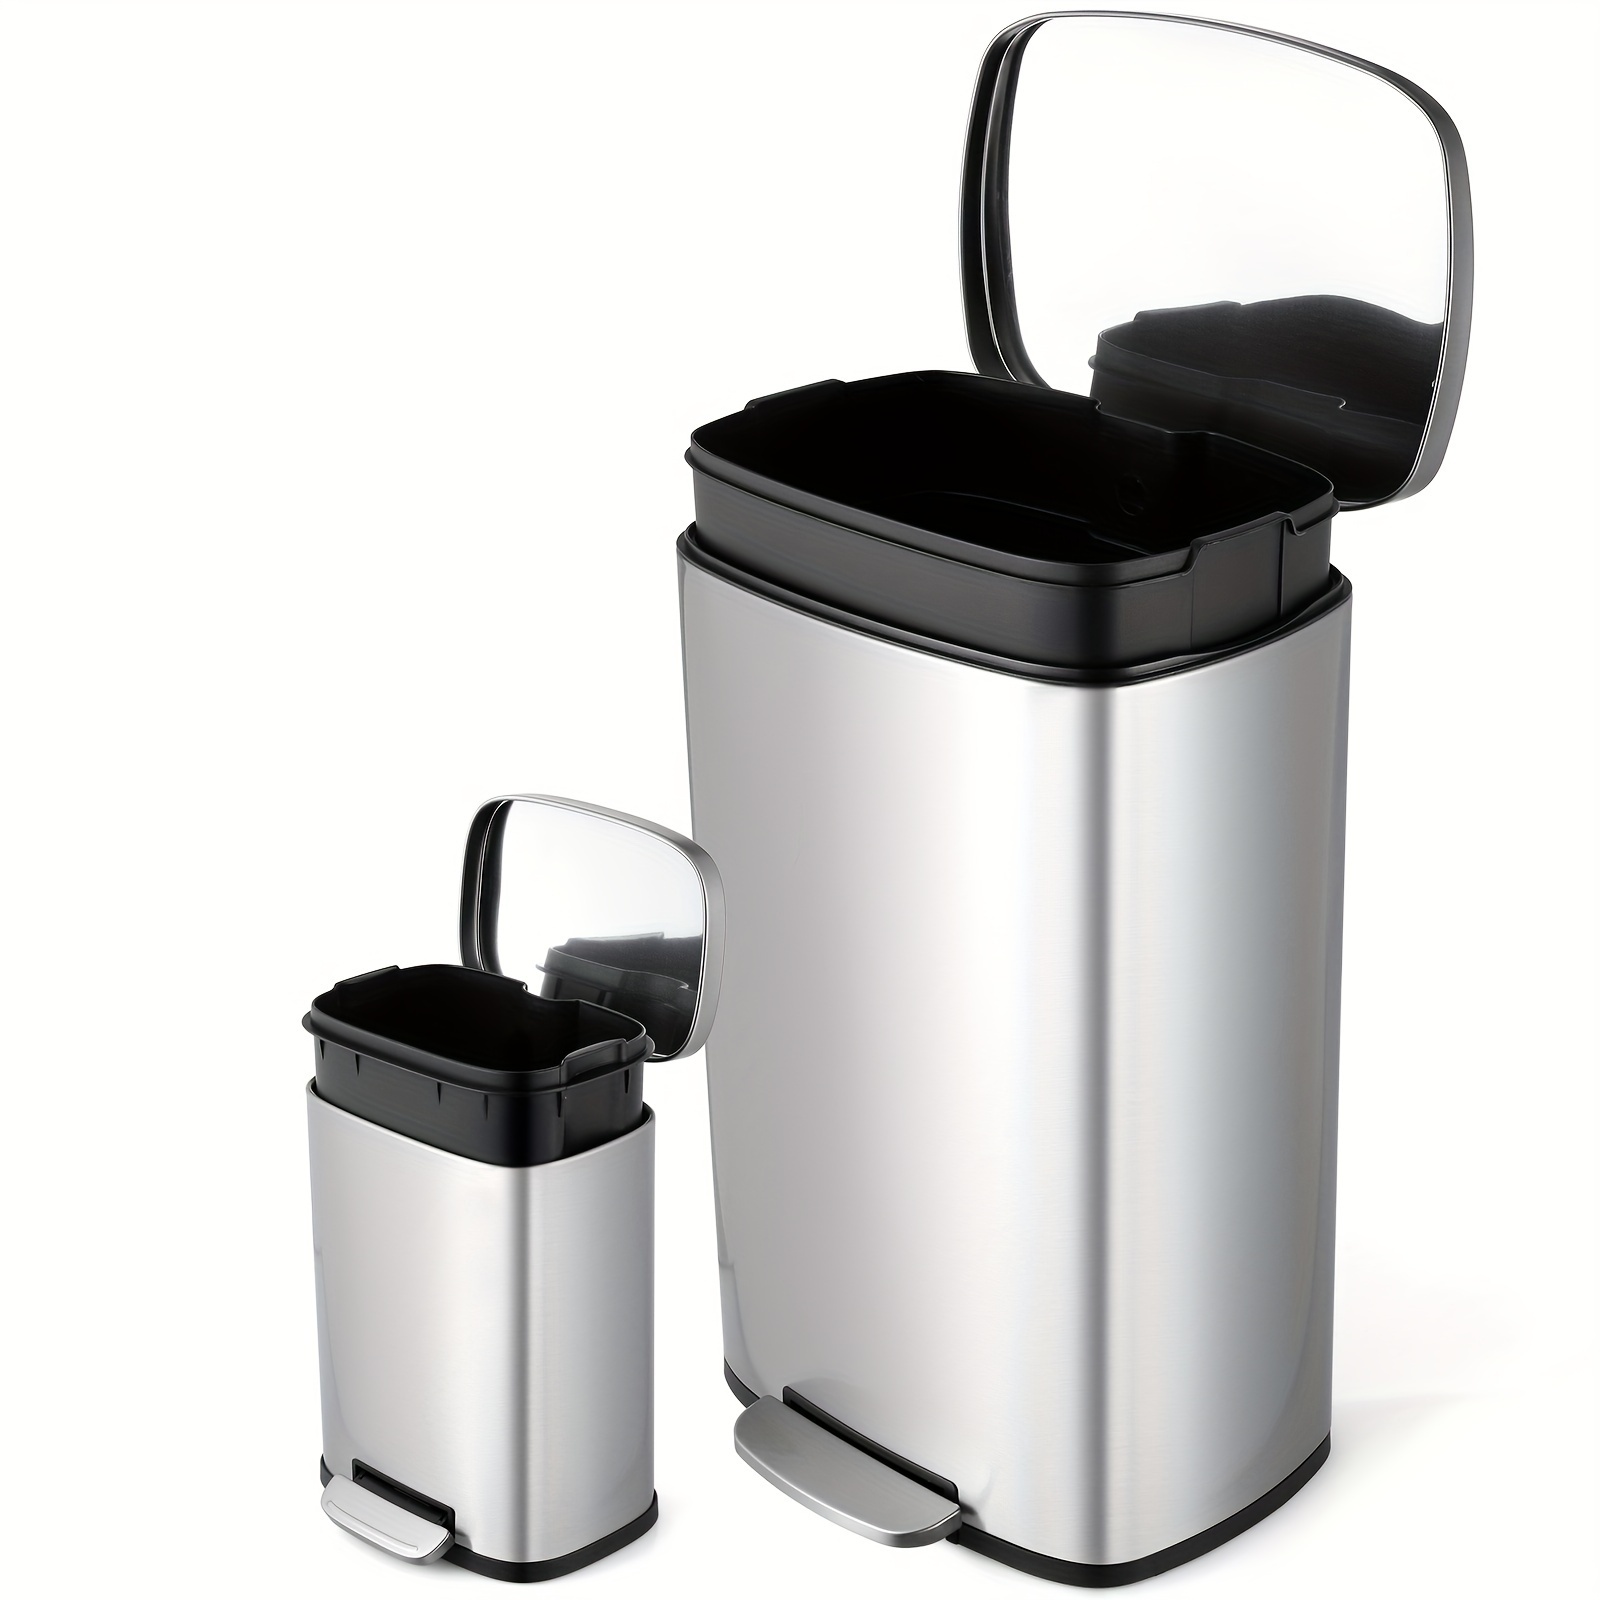 

13.2+1.3 Gallon (50+5l) Step Trash Can, Stainless Steel Garbage Bin, Soft-close Rubbish Bin With Removable Plastic Inner Bucket, Fingerprint-proof, Lid Dustbin, For Kitchen Home